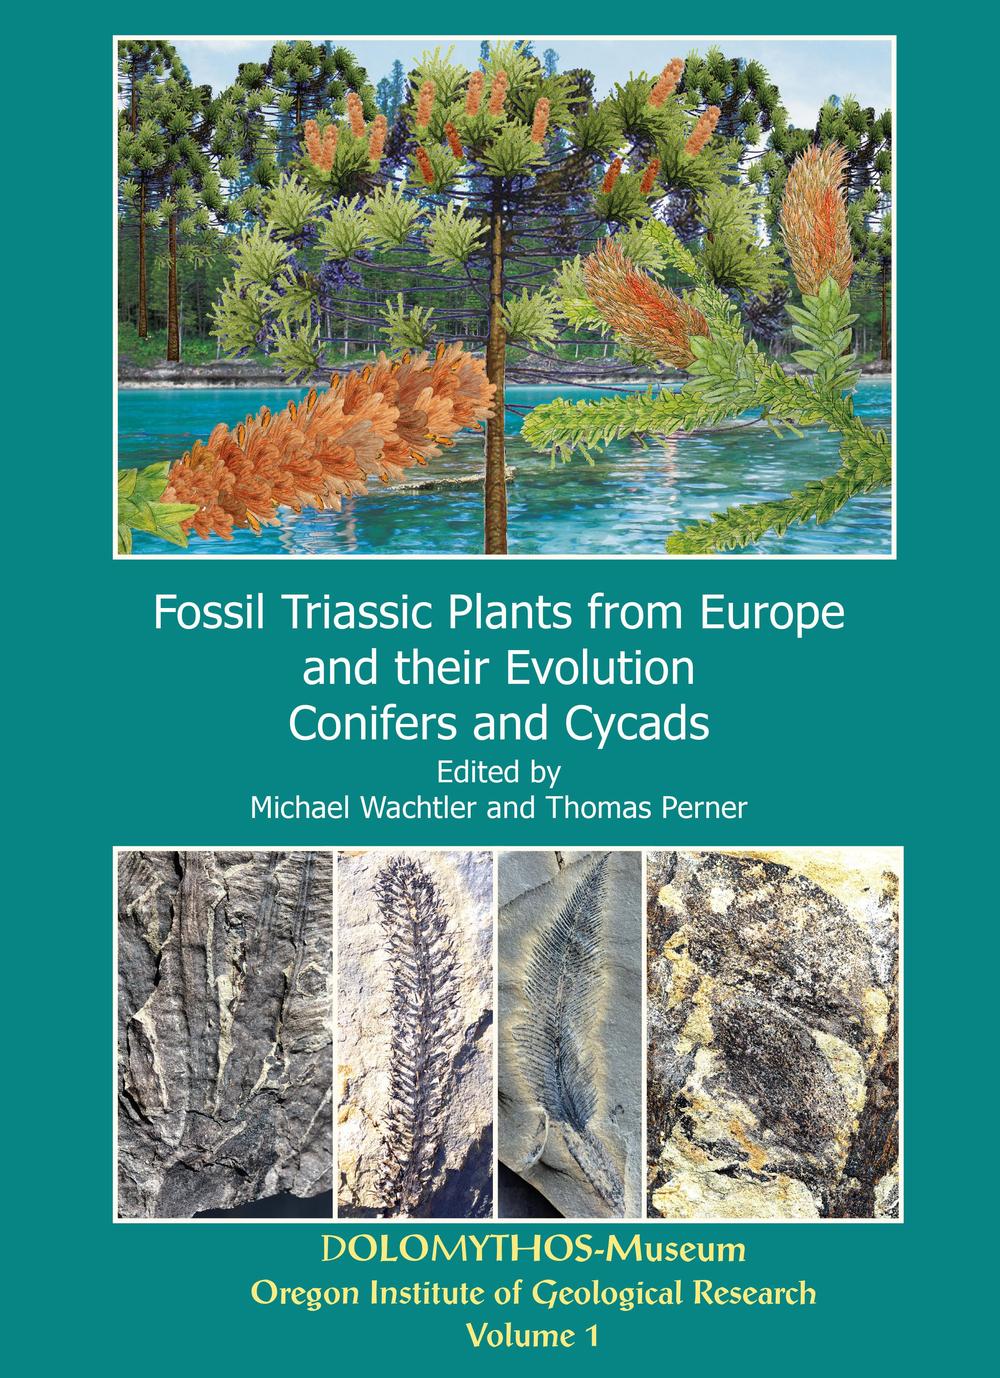 Fossil triassic plants from Europe and their evolution. Vol. 1: Conifers and cycads